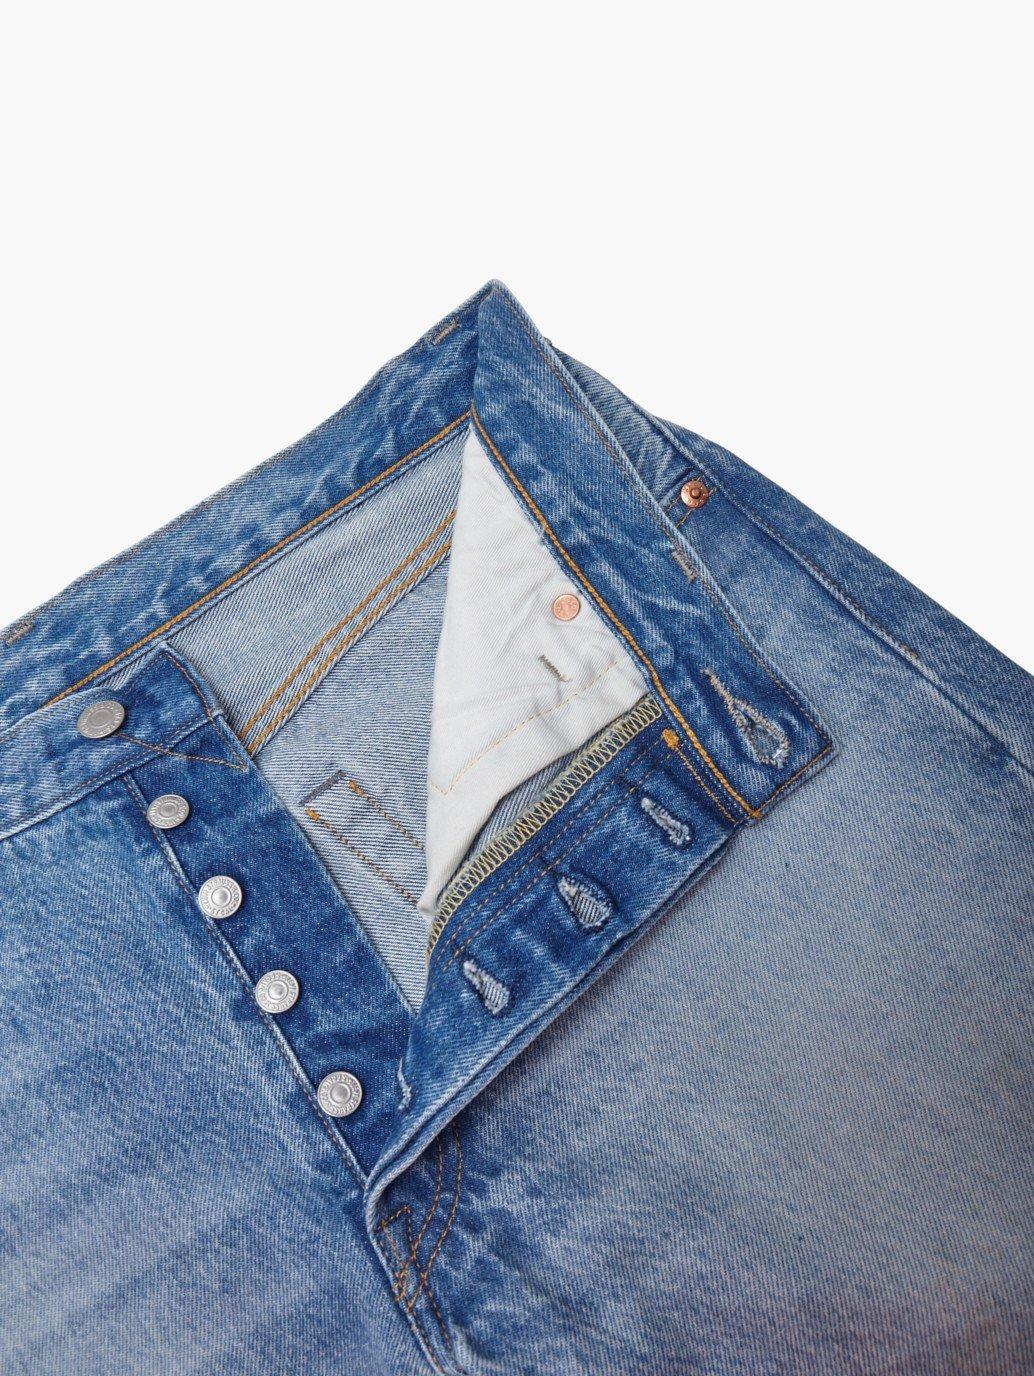 levis malaysia mens 501 54 jeans A46770006 17 Details